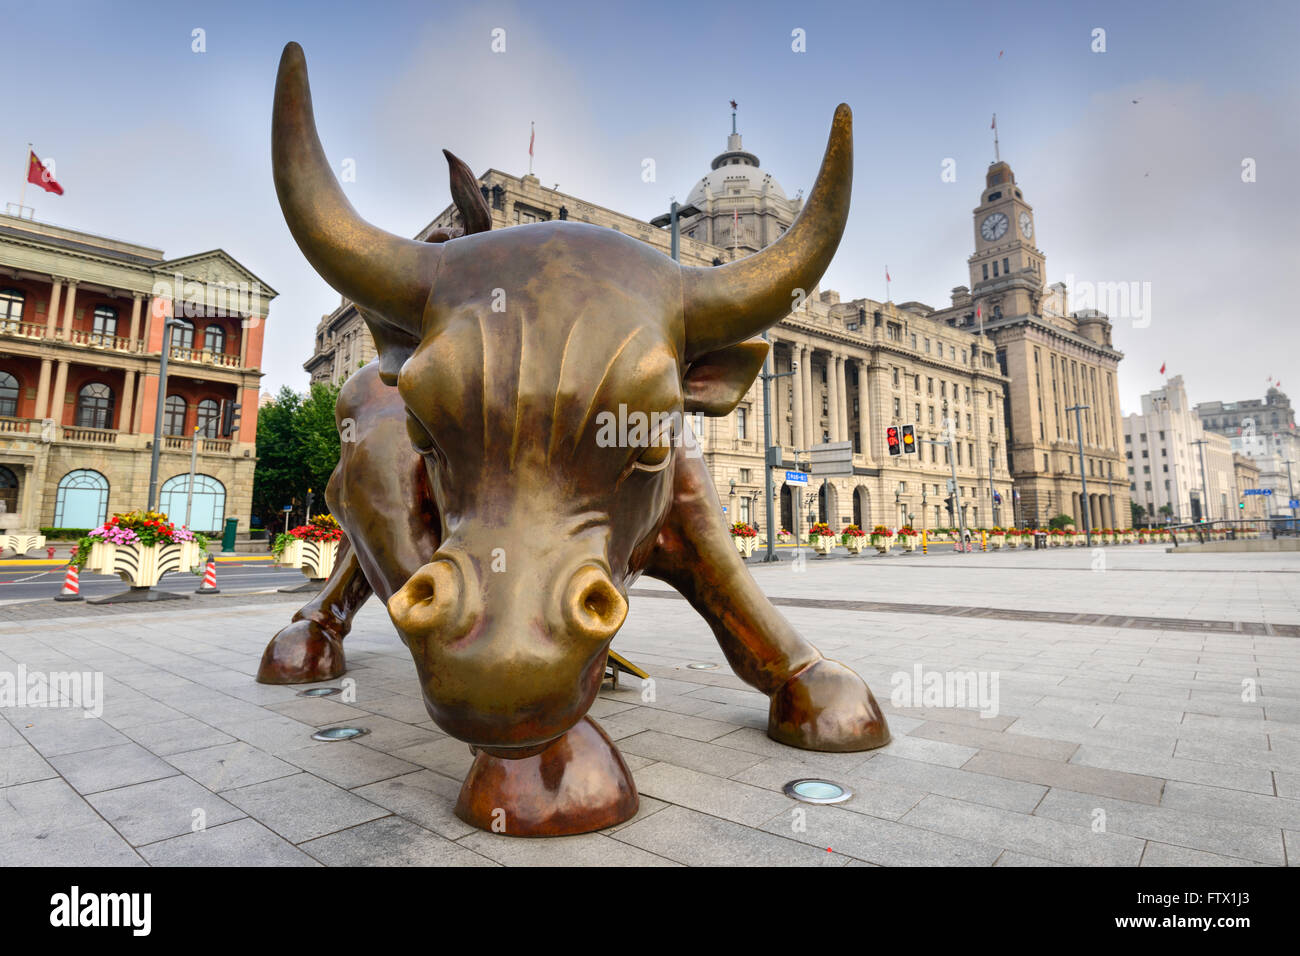 SHANGHAI, CHINA - JUNE 19, 2014: The Bund Bull sculpture in the morning. The work was unveiled in 2010. Stock Photo